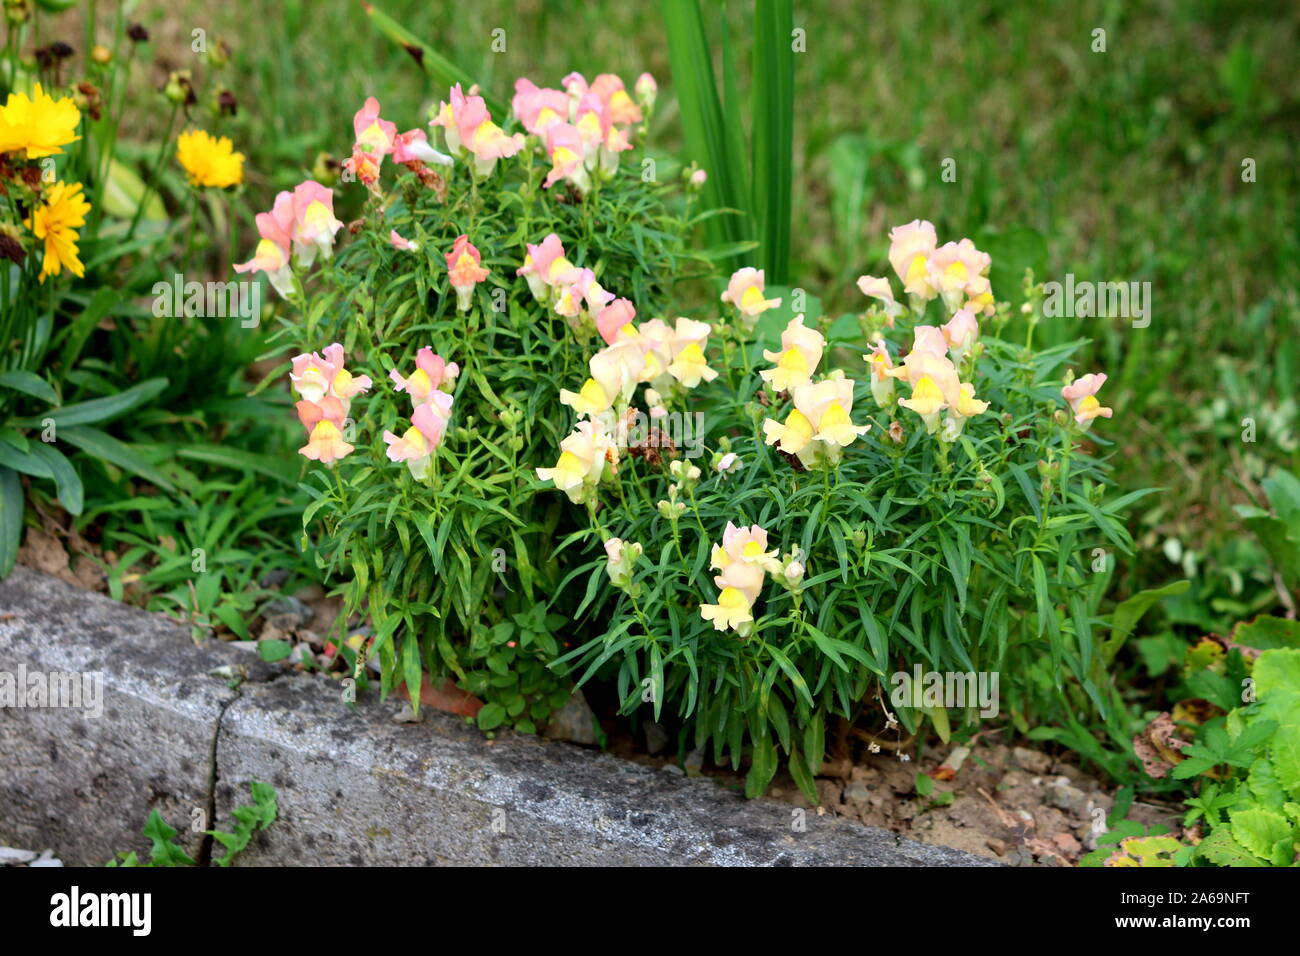 Bunch of Common snapdragon or Antirrhinum majus herbaceous perennial plants with small fully open blooming light pink flowers surrounded with green Stock Photo